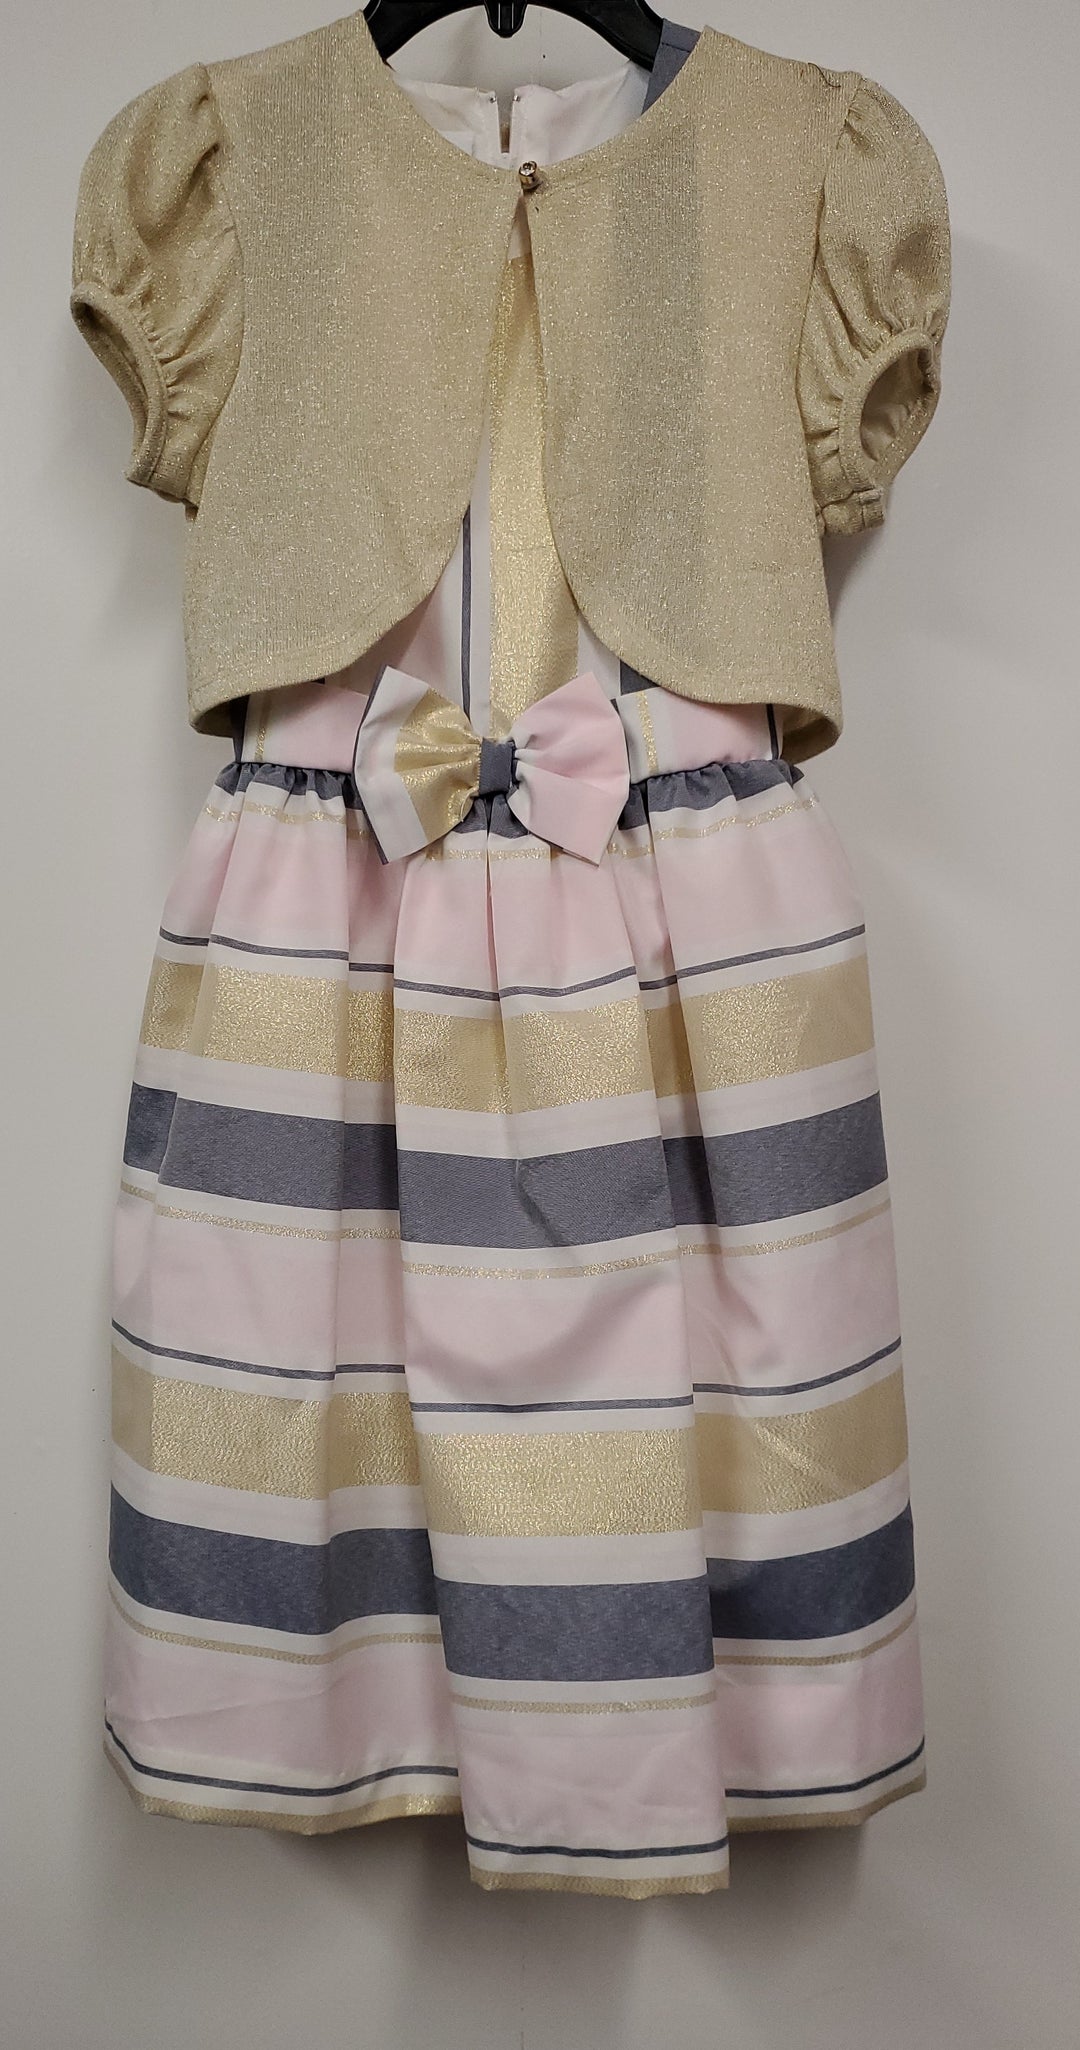 Girls Bonnie Jean Pink /Gray Formal Dress with Jacket